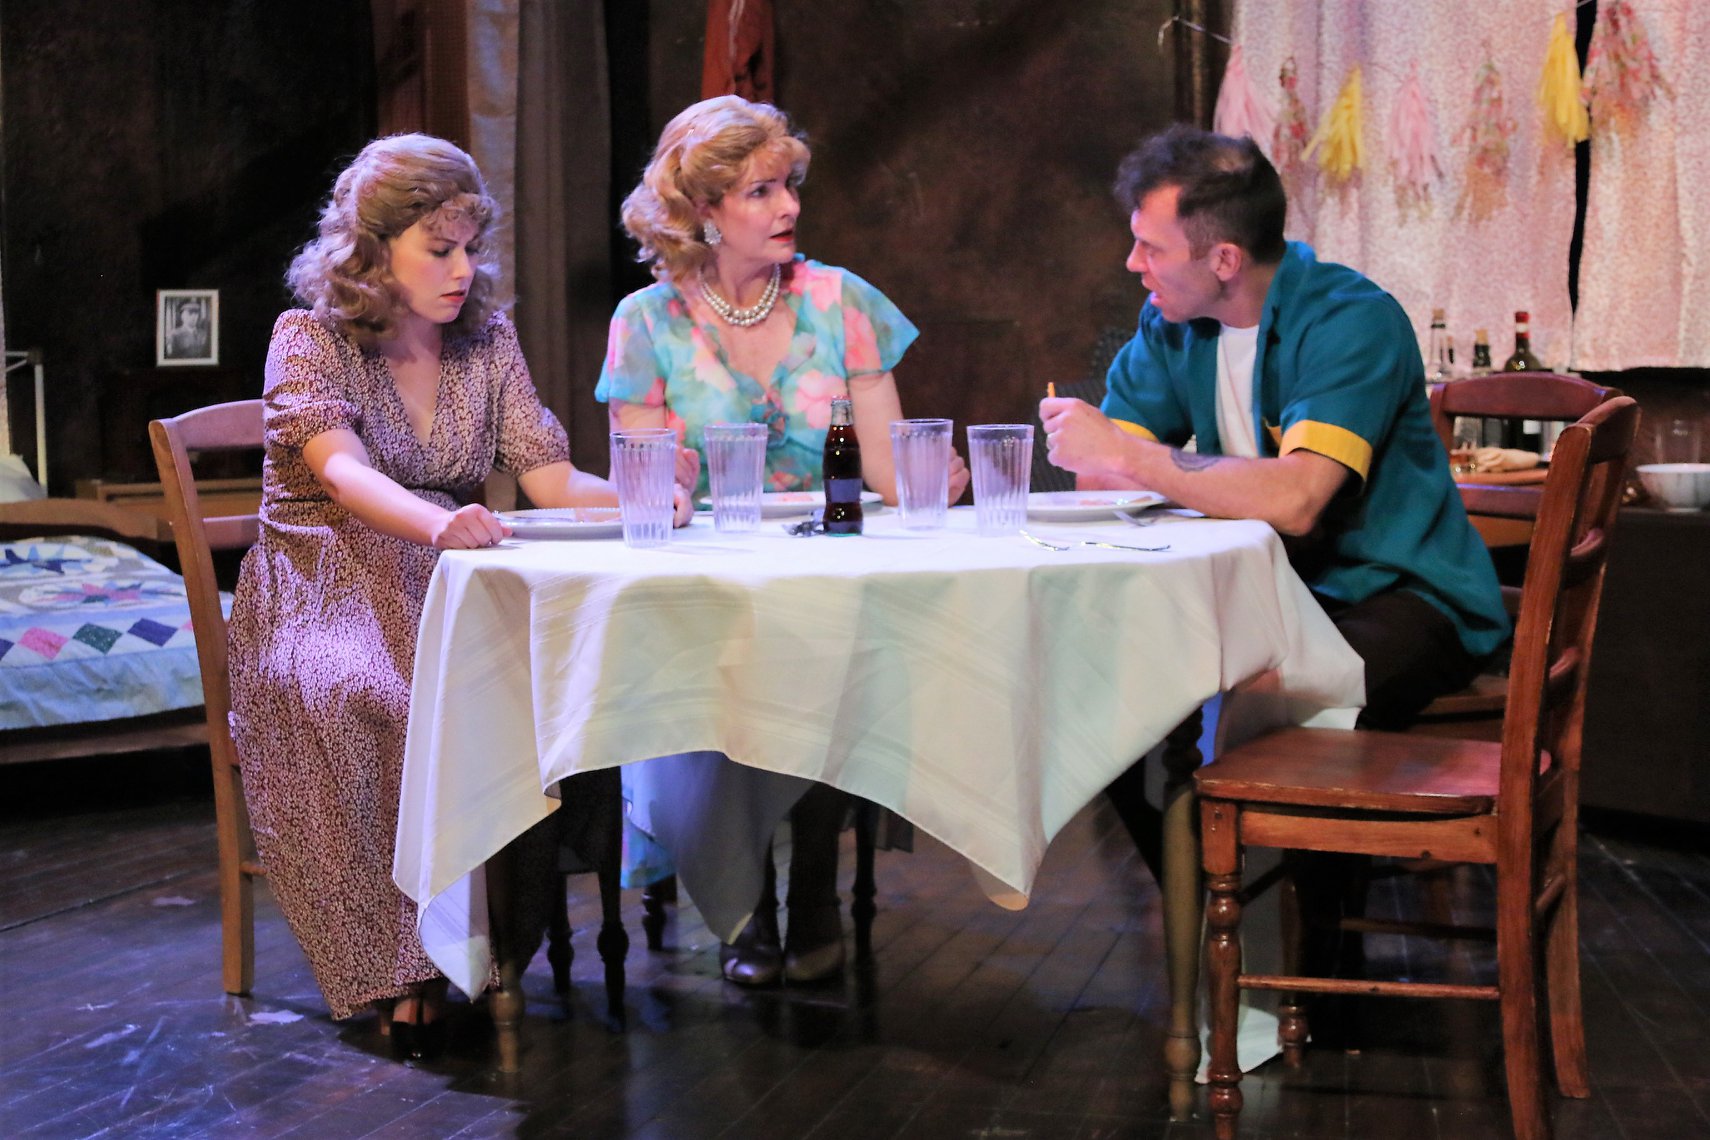 From left to right: Jessica Kochu as Stella Kowalski; Susannah Hough as Blanche Dubois; Aaron Pyle as Stanley Kowalski. Photo credit: DawnEllen Ferry.